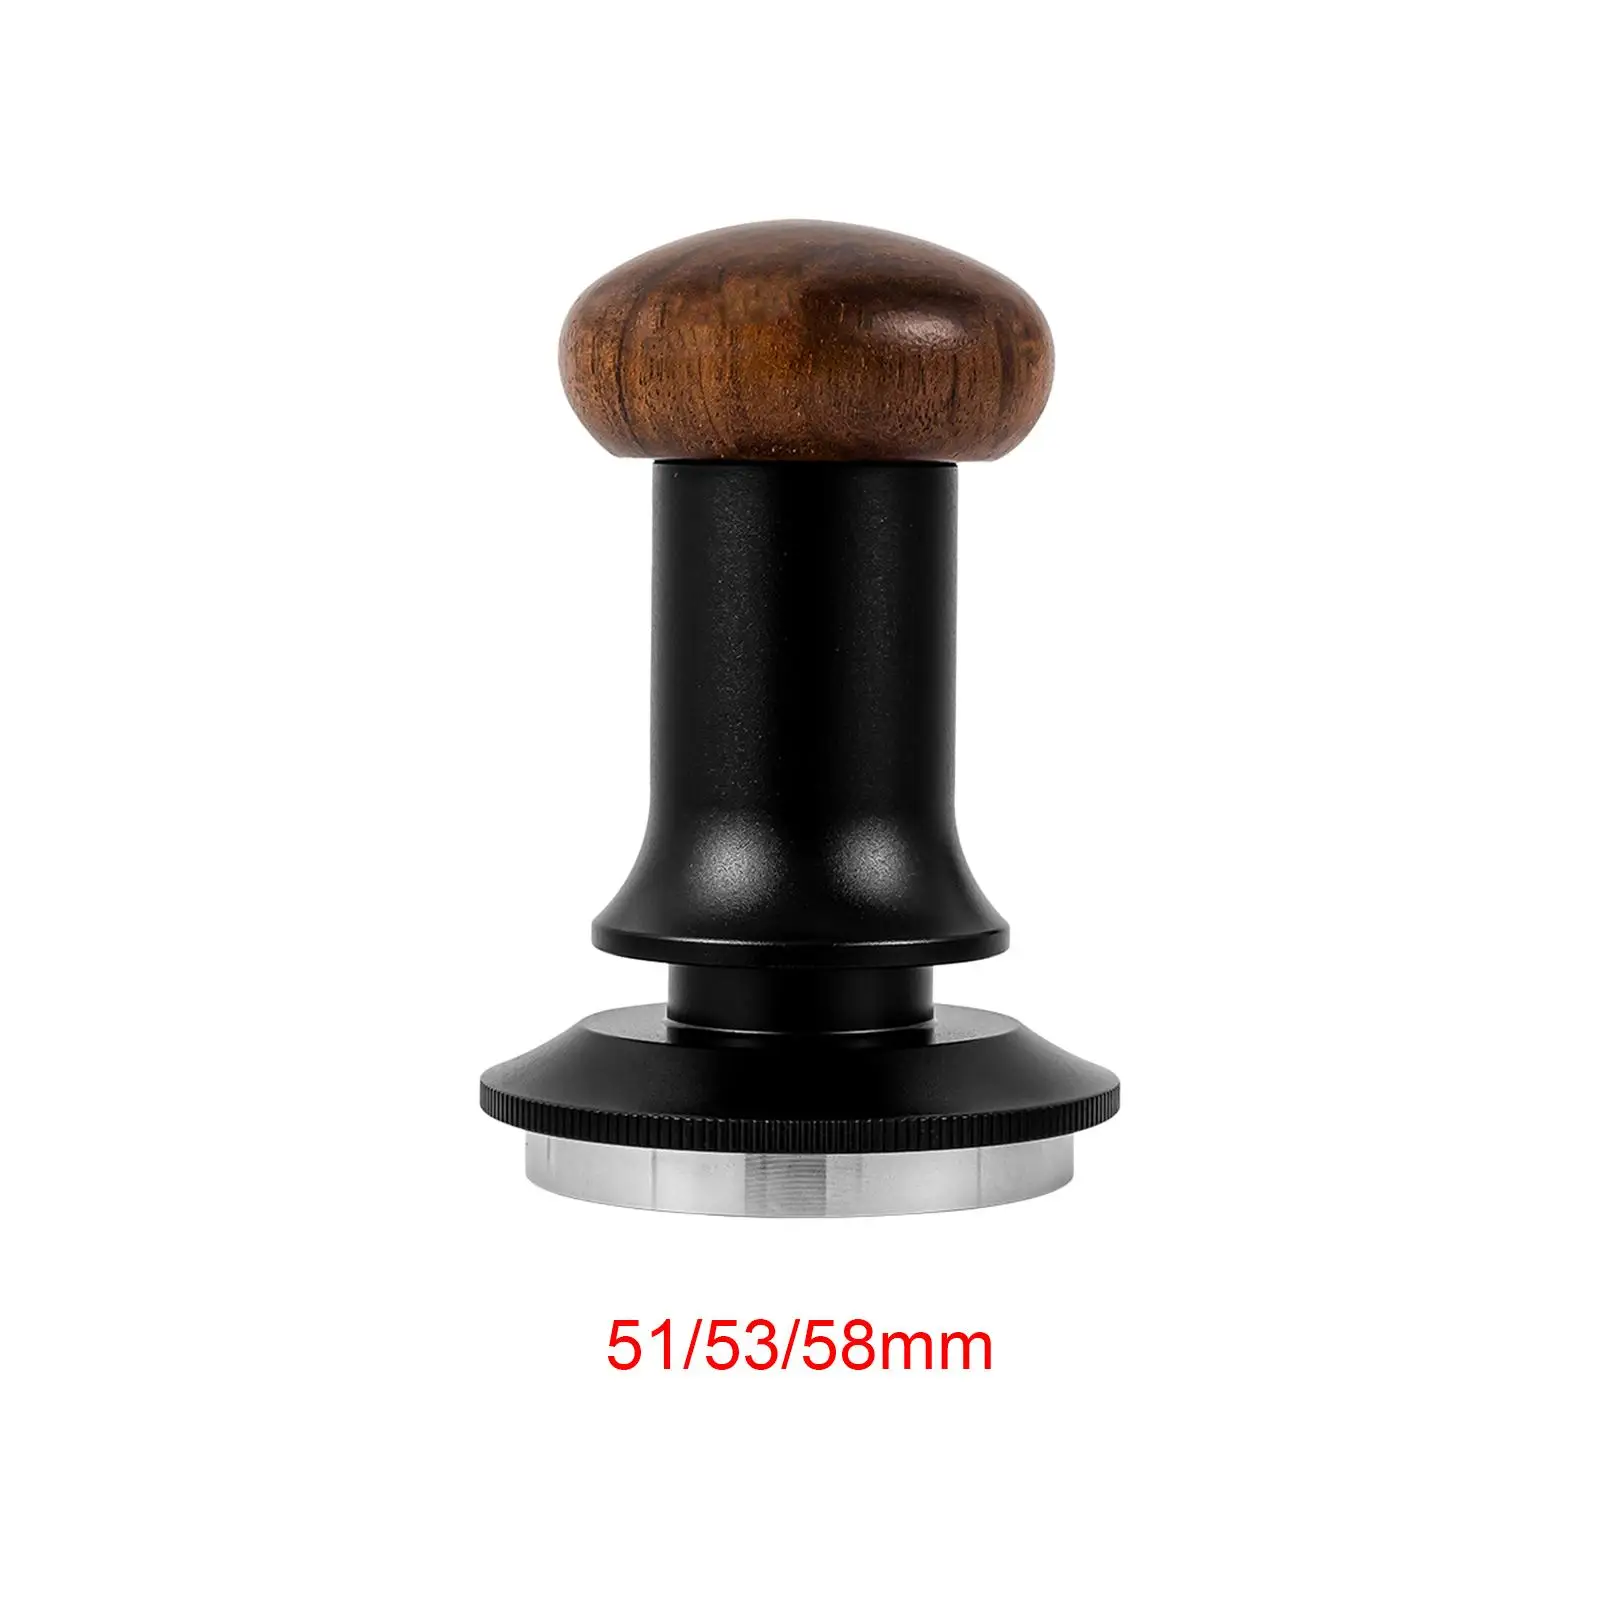 

Coffee Tamper Walnut Wood Constant Pressure Flat Base Press Tool for Espresso Machines Cafe Restaurants Coffee Grounds Accessory